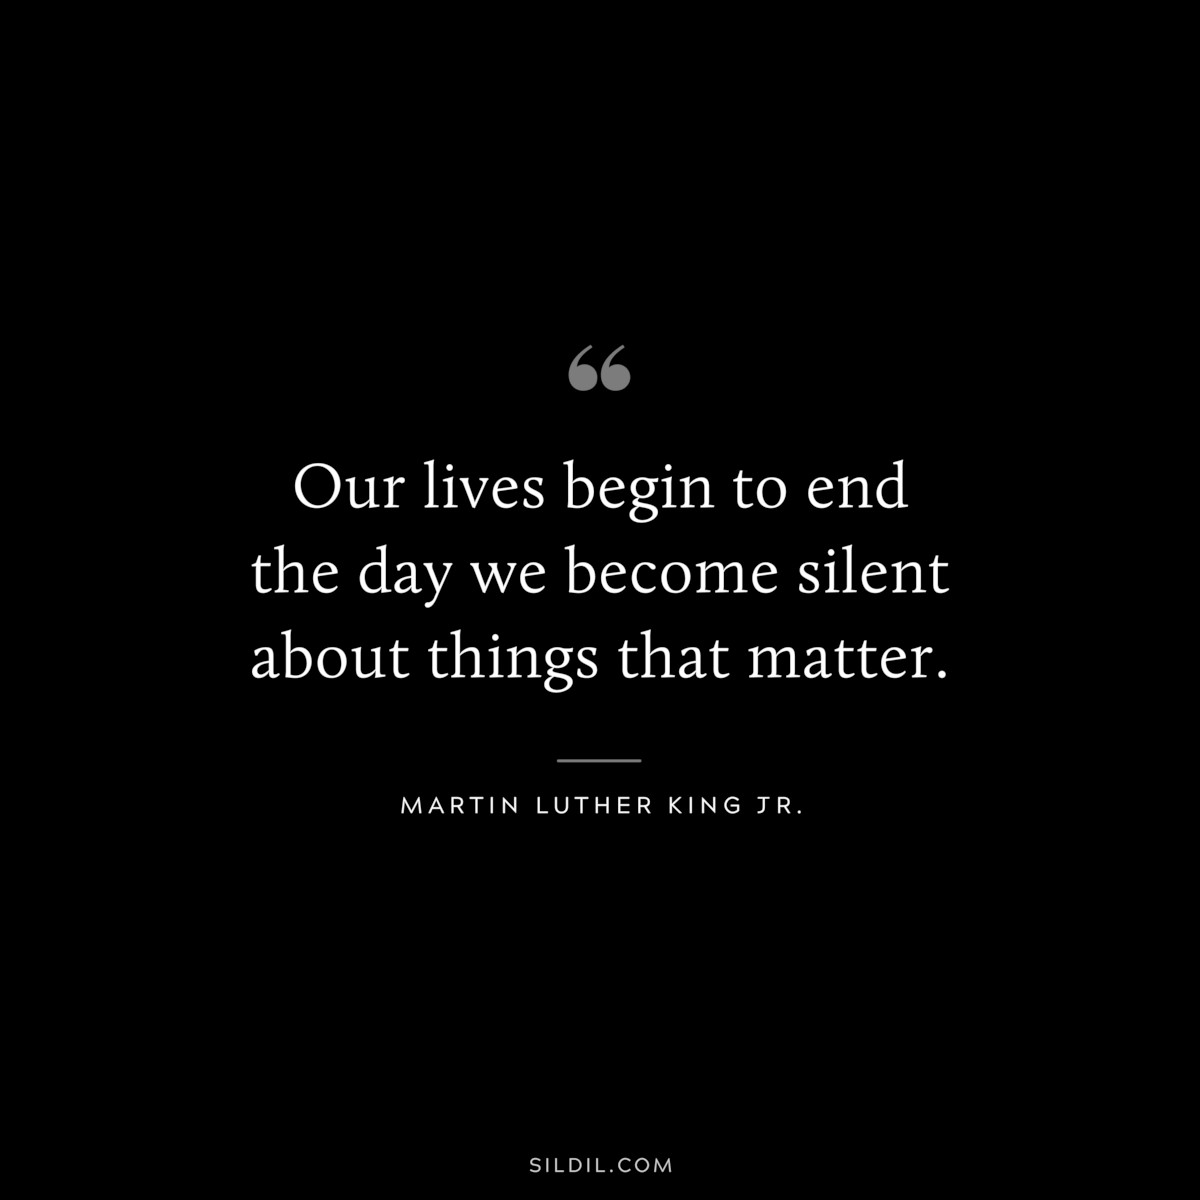 Our lives begin to end the day we become silent about things that matter. ― Martin Luther King Jr.